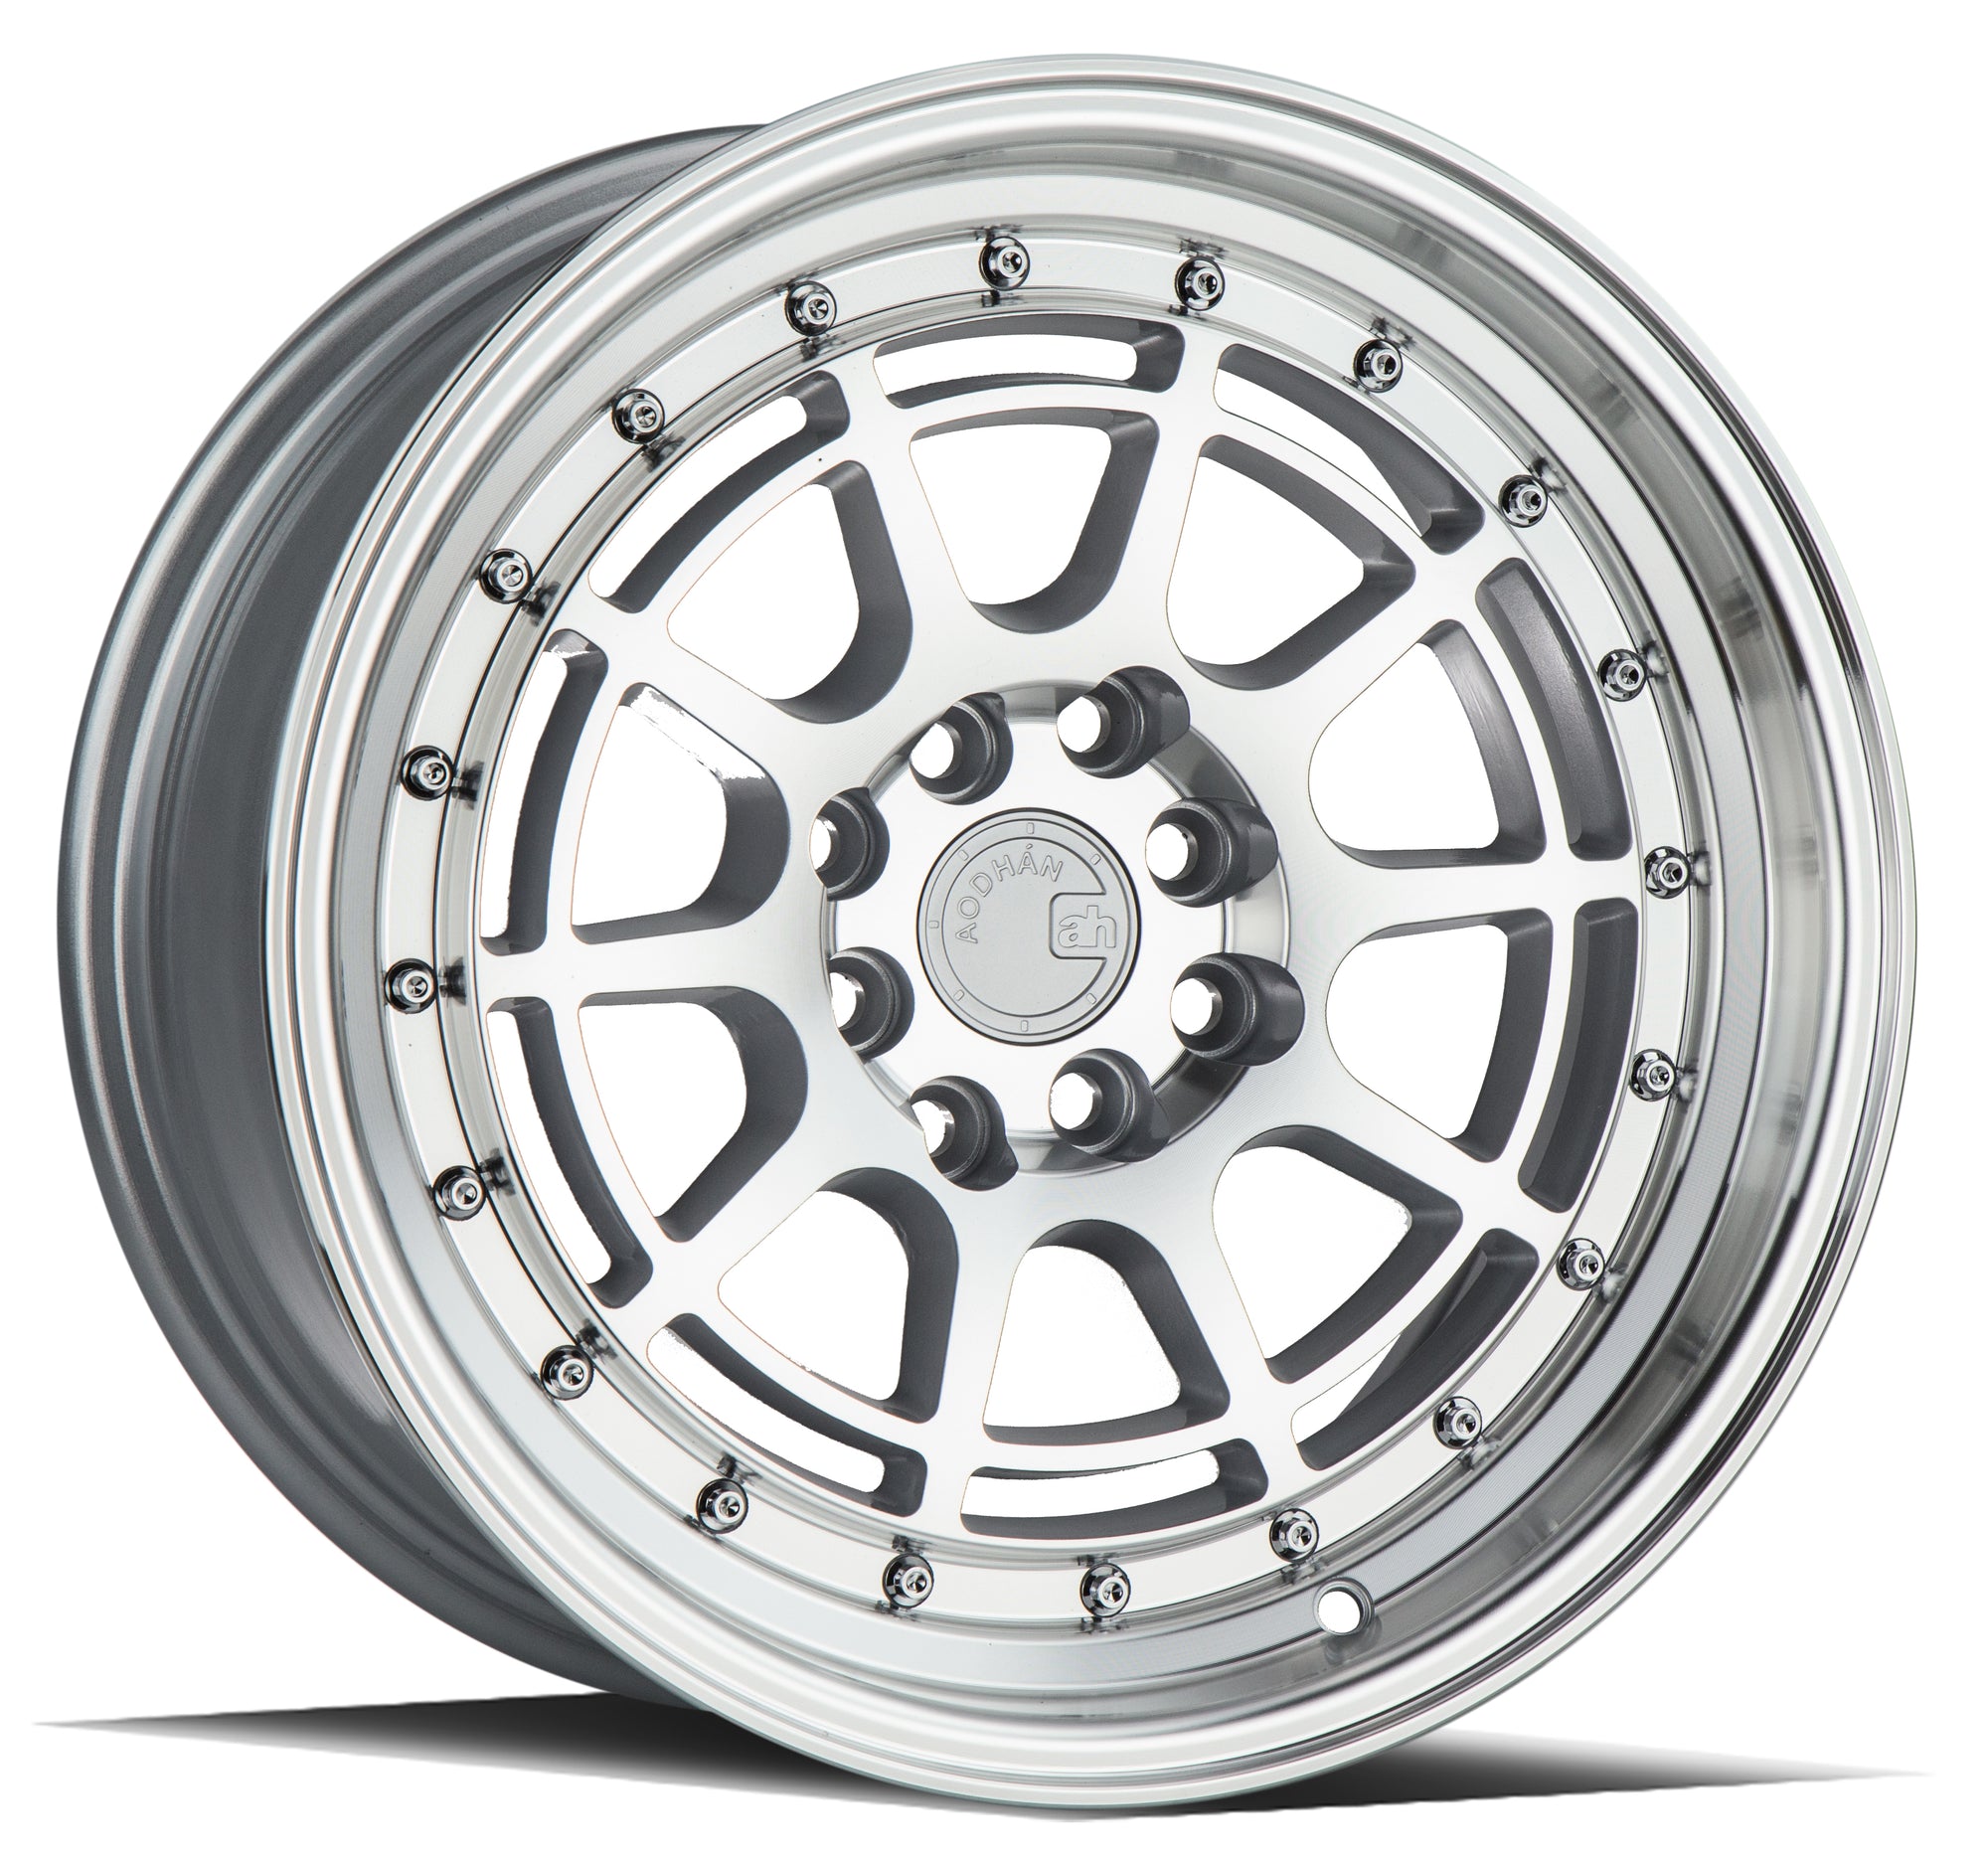 Aodhan AH04 16x8 4x100/114.3 +15 Silver Machined Face And Lip